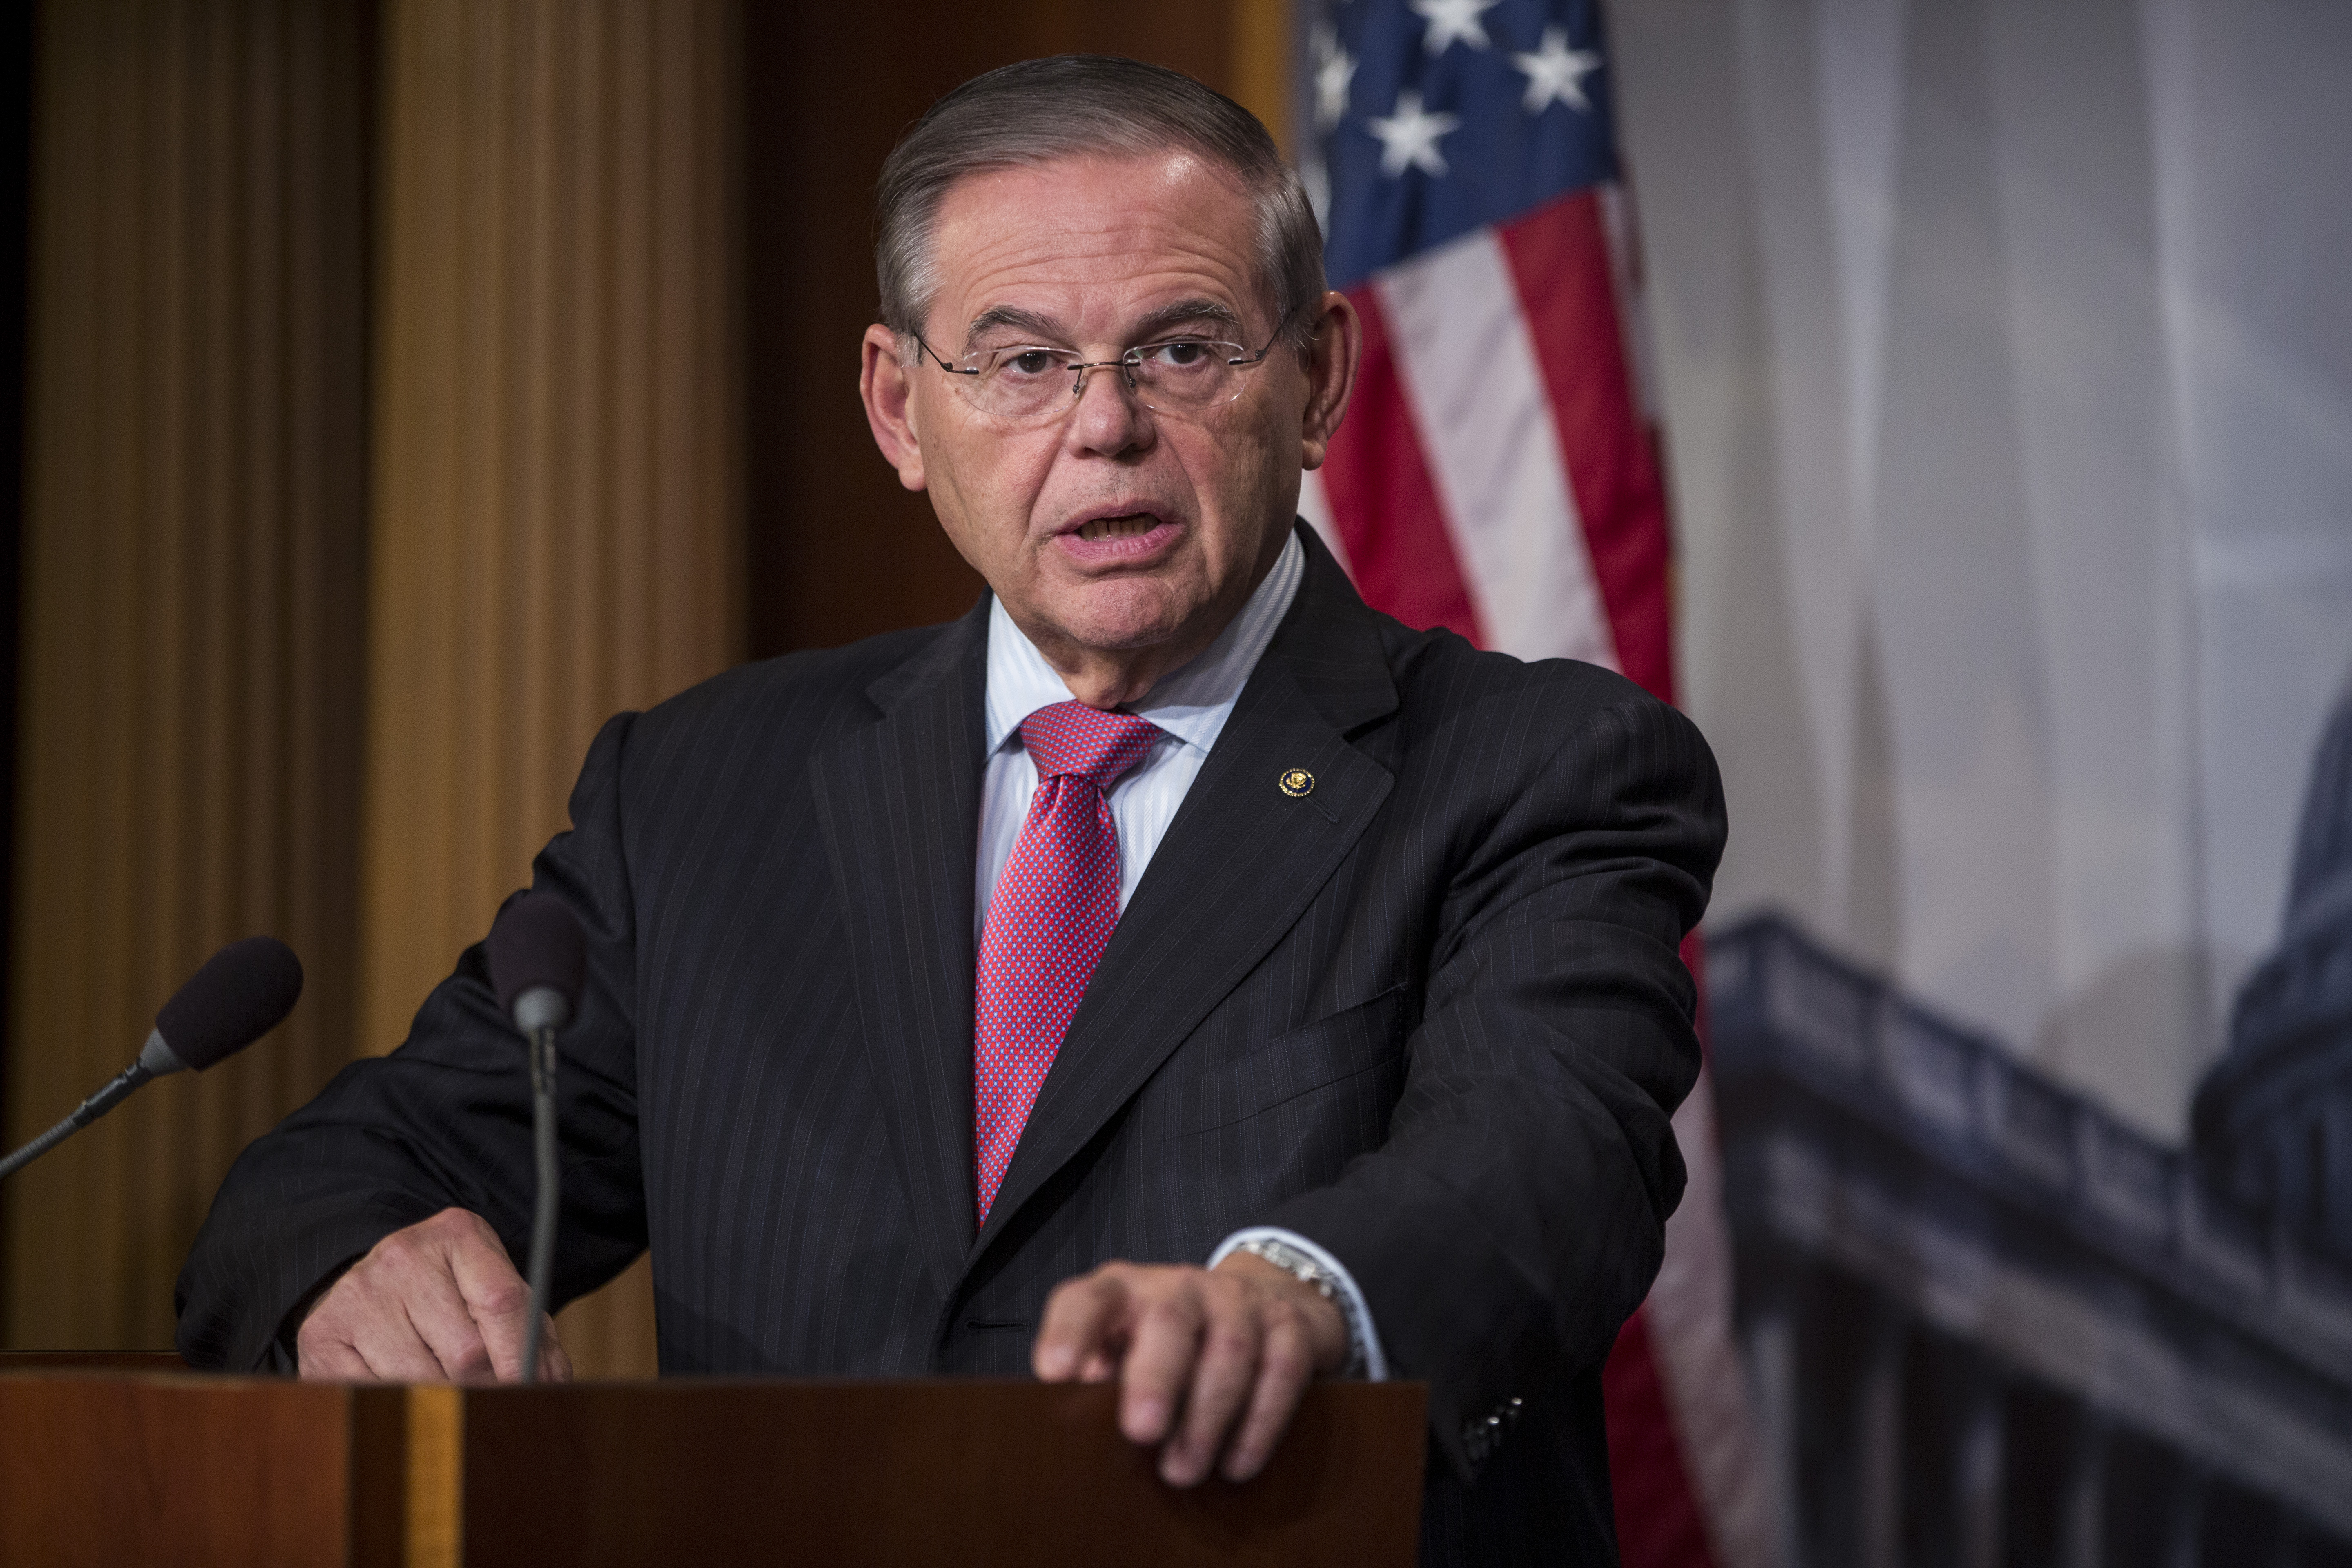 Sen. Bob Menendez speaks during a news conference discussing discuss a resolution to end U.S. military support for Saudi Arabia's war with Yemen on Capitol Hill on December 12, 2018 in Washington, DC. (Photo by Zach Gibson/Getty Images)